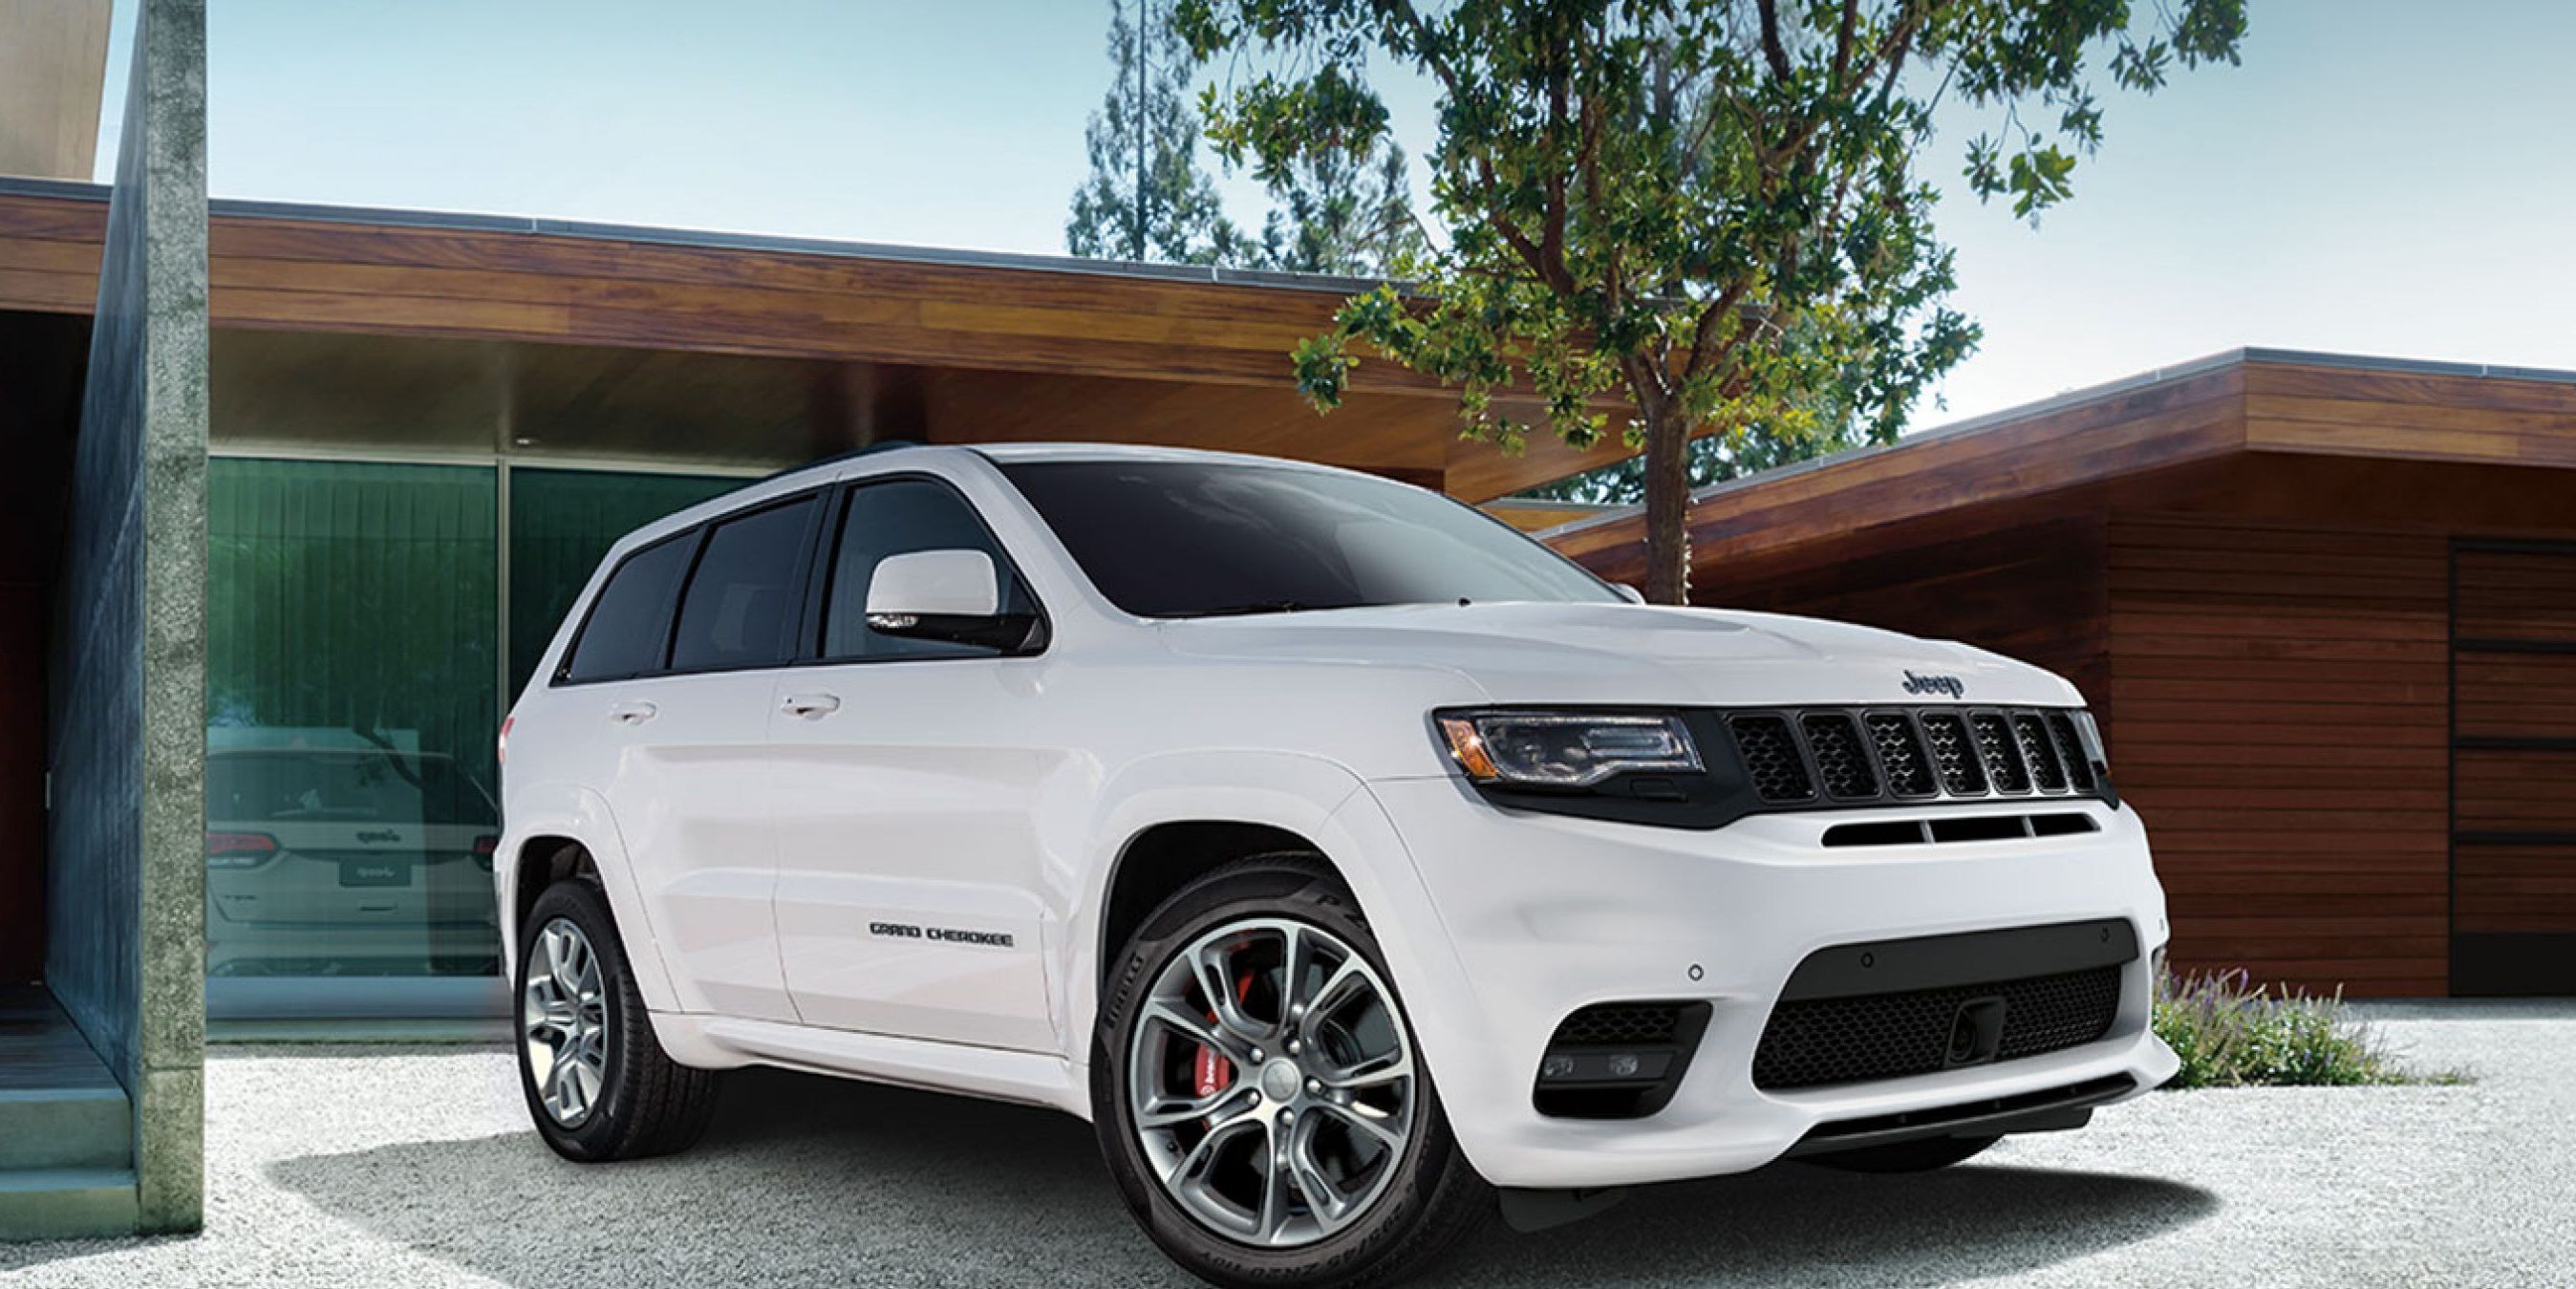 2021 Jeep Grand Cherokee SRT Overview, Pricing, and Specs